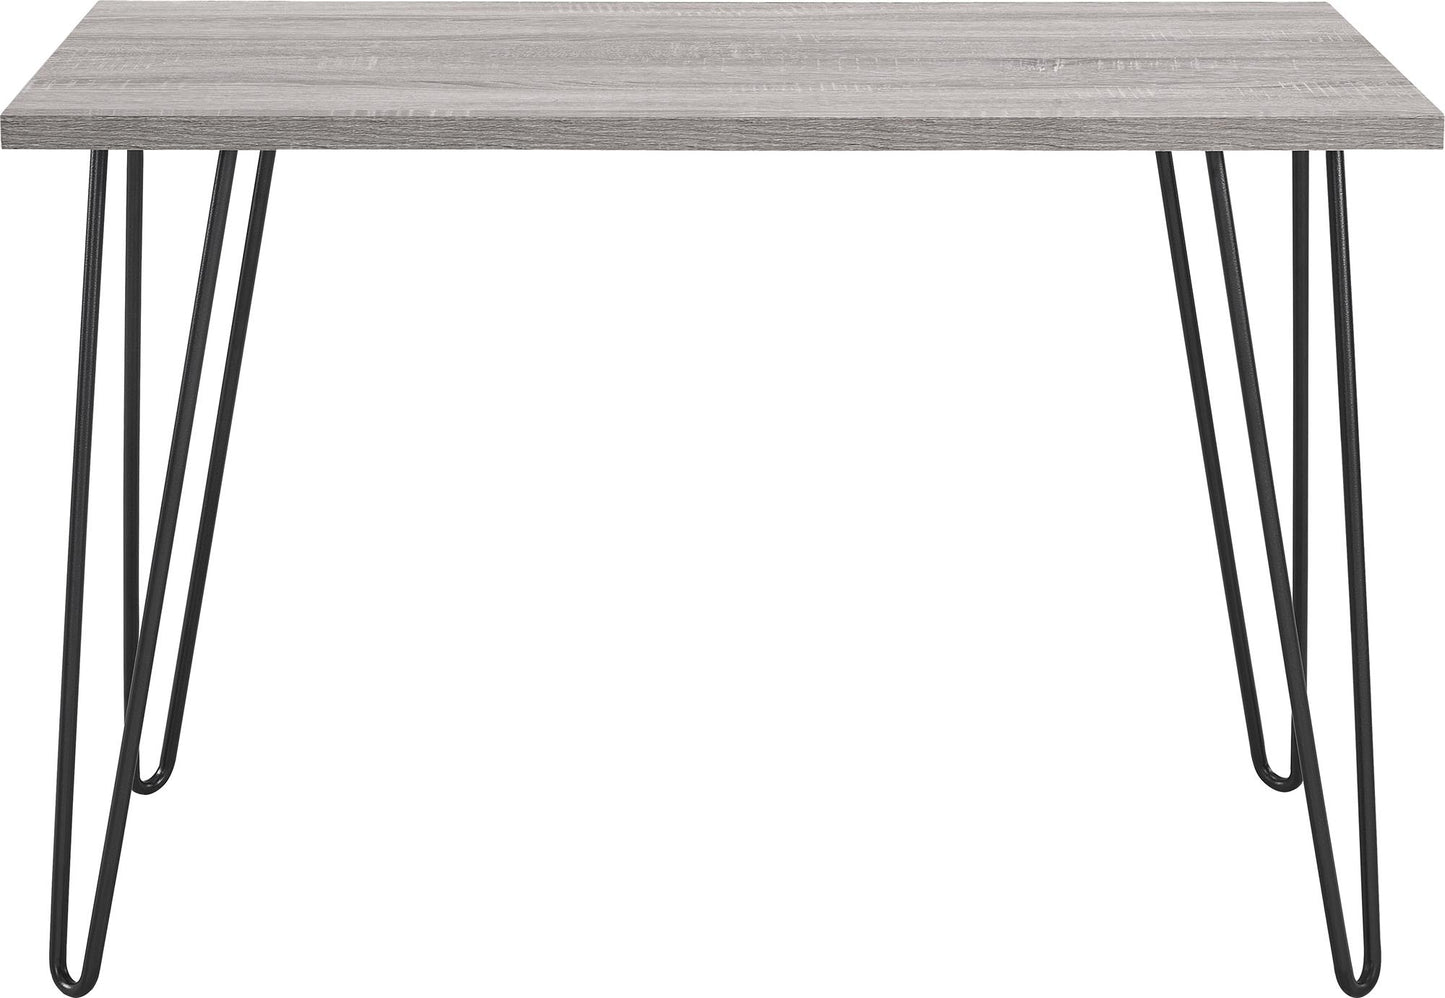 Owen Retro Computer Desk with Large Worksurface and Hairpin Legs - Distressed Gray Oak